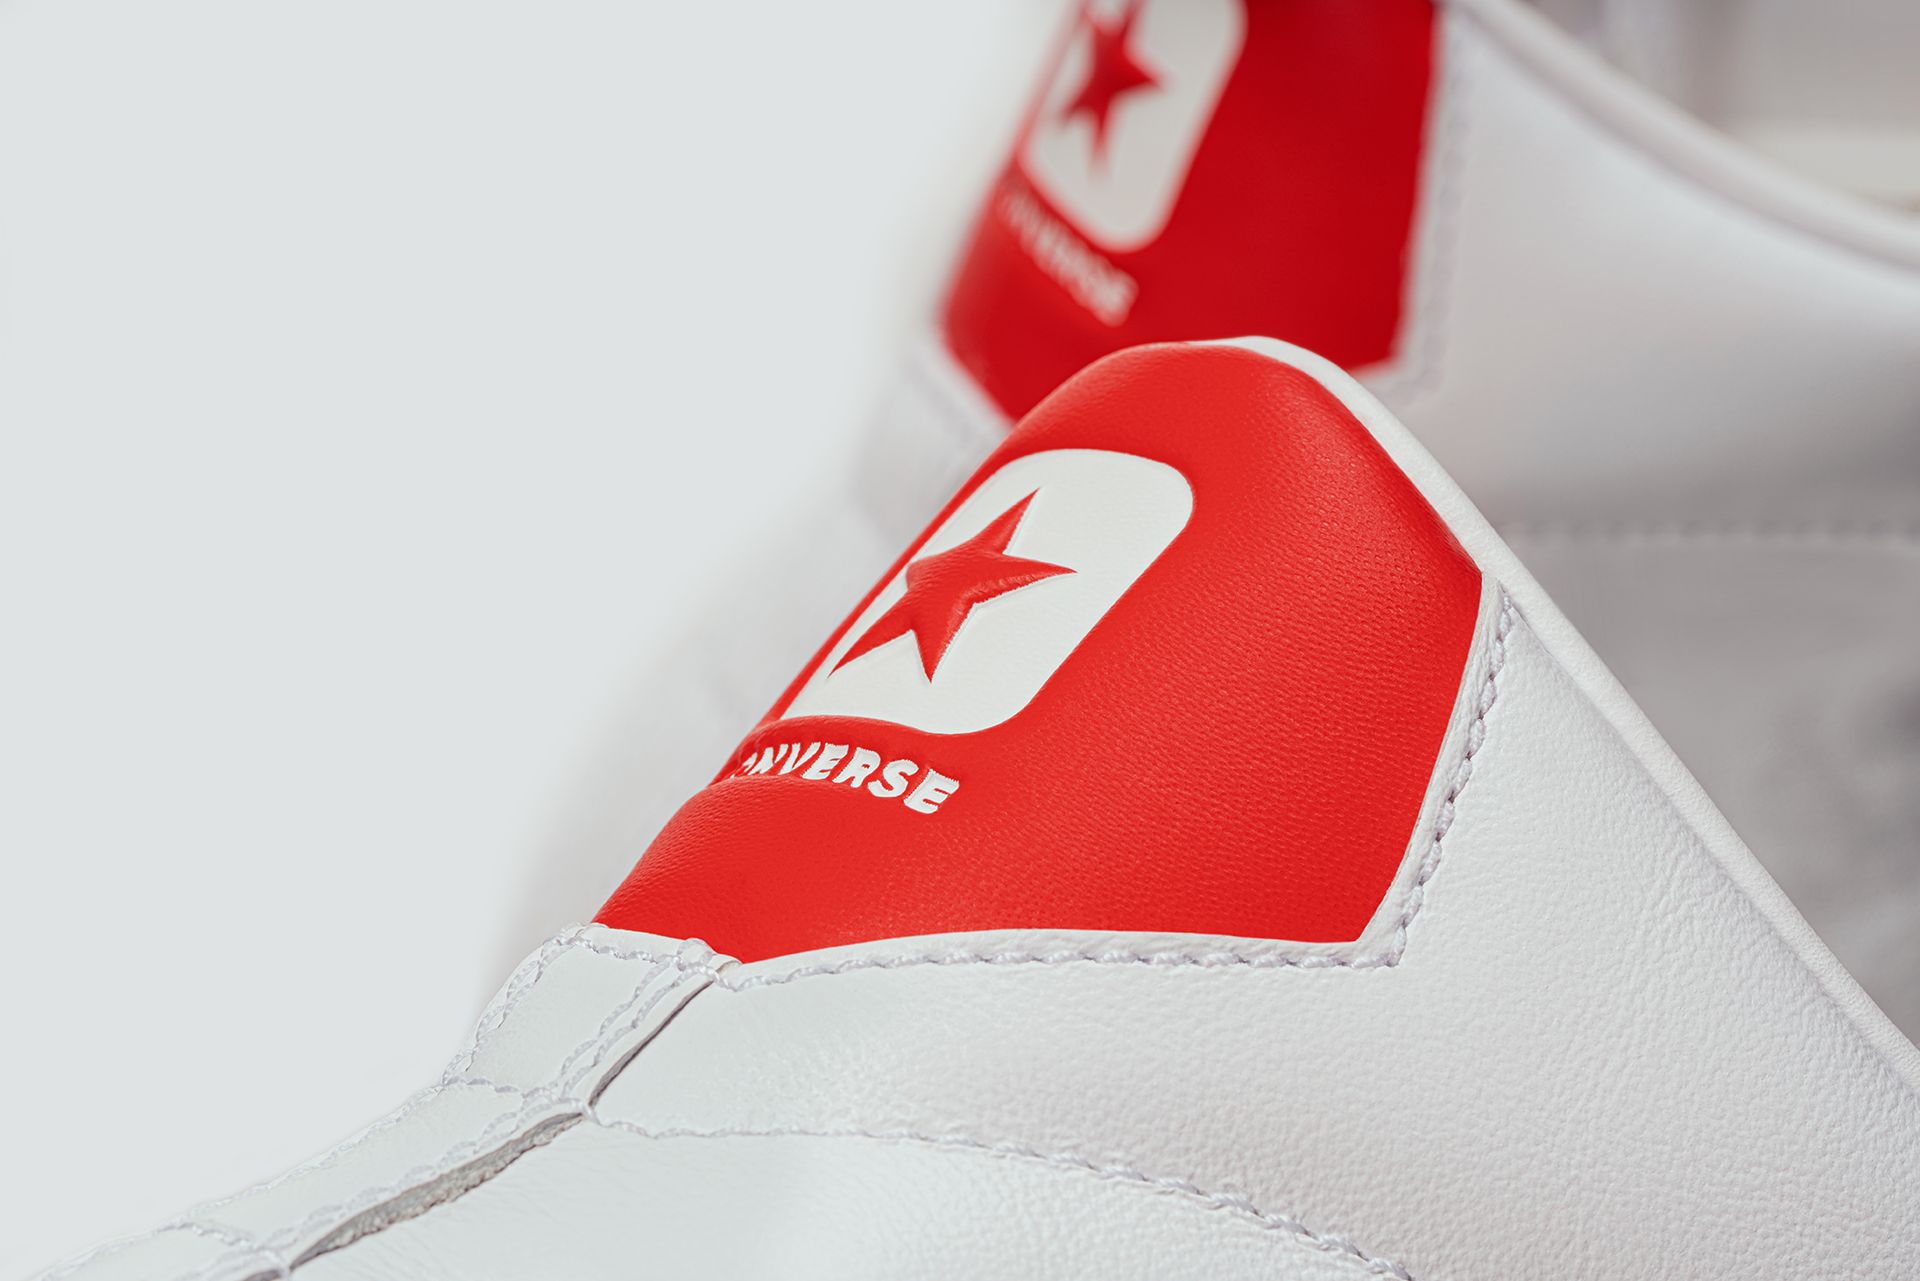 close up of heel converse pro leather shoe showing red star logo